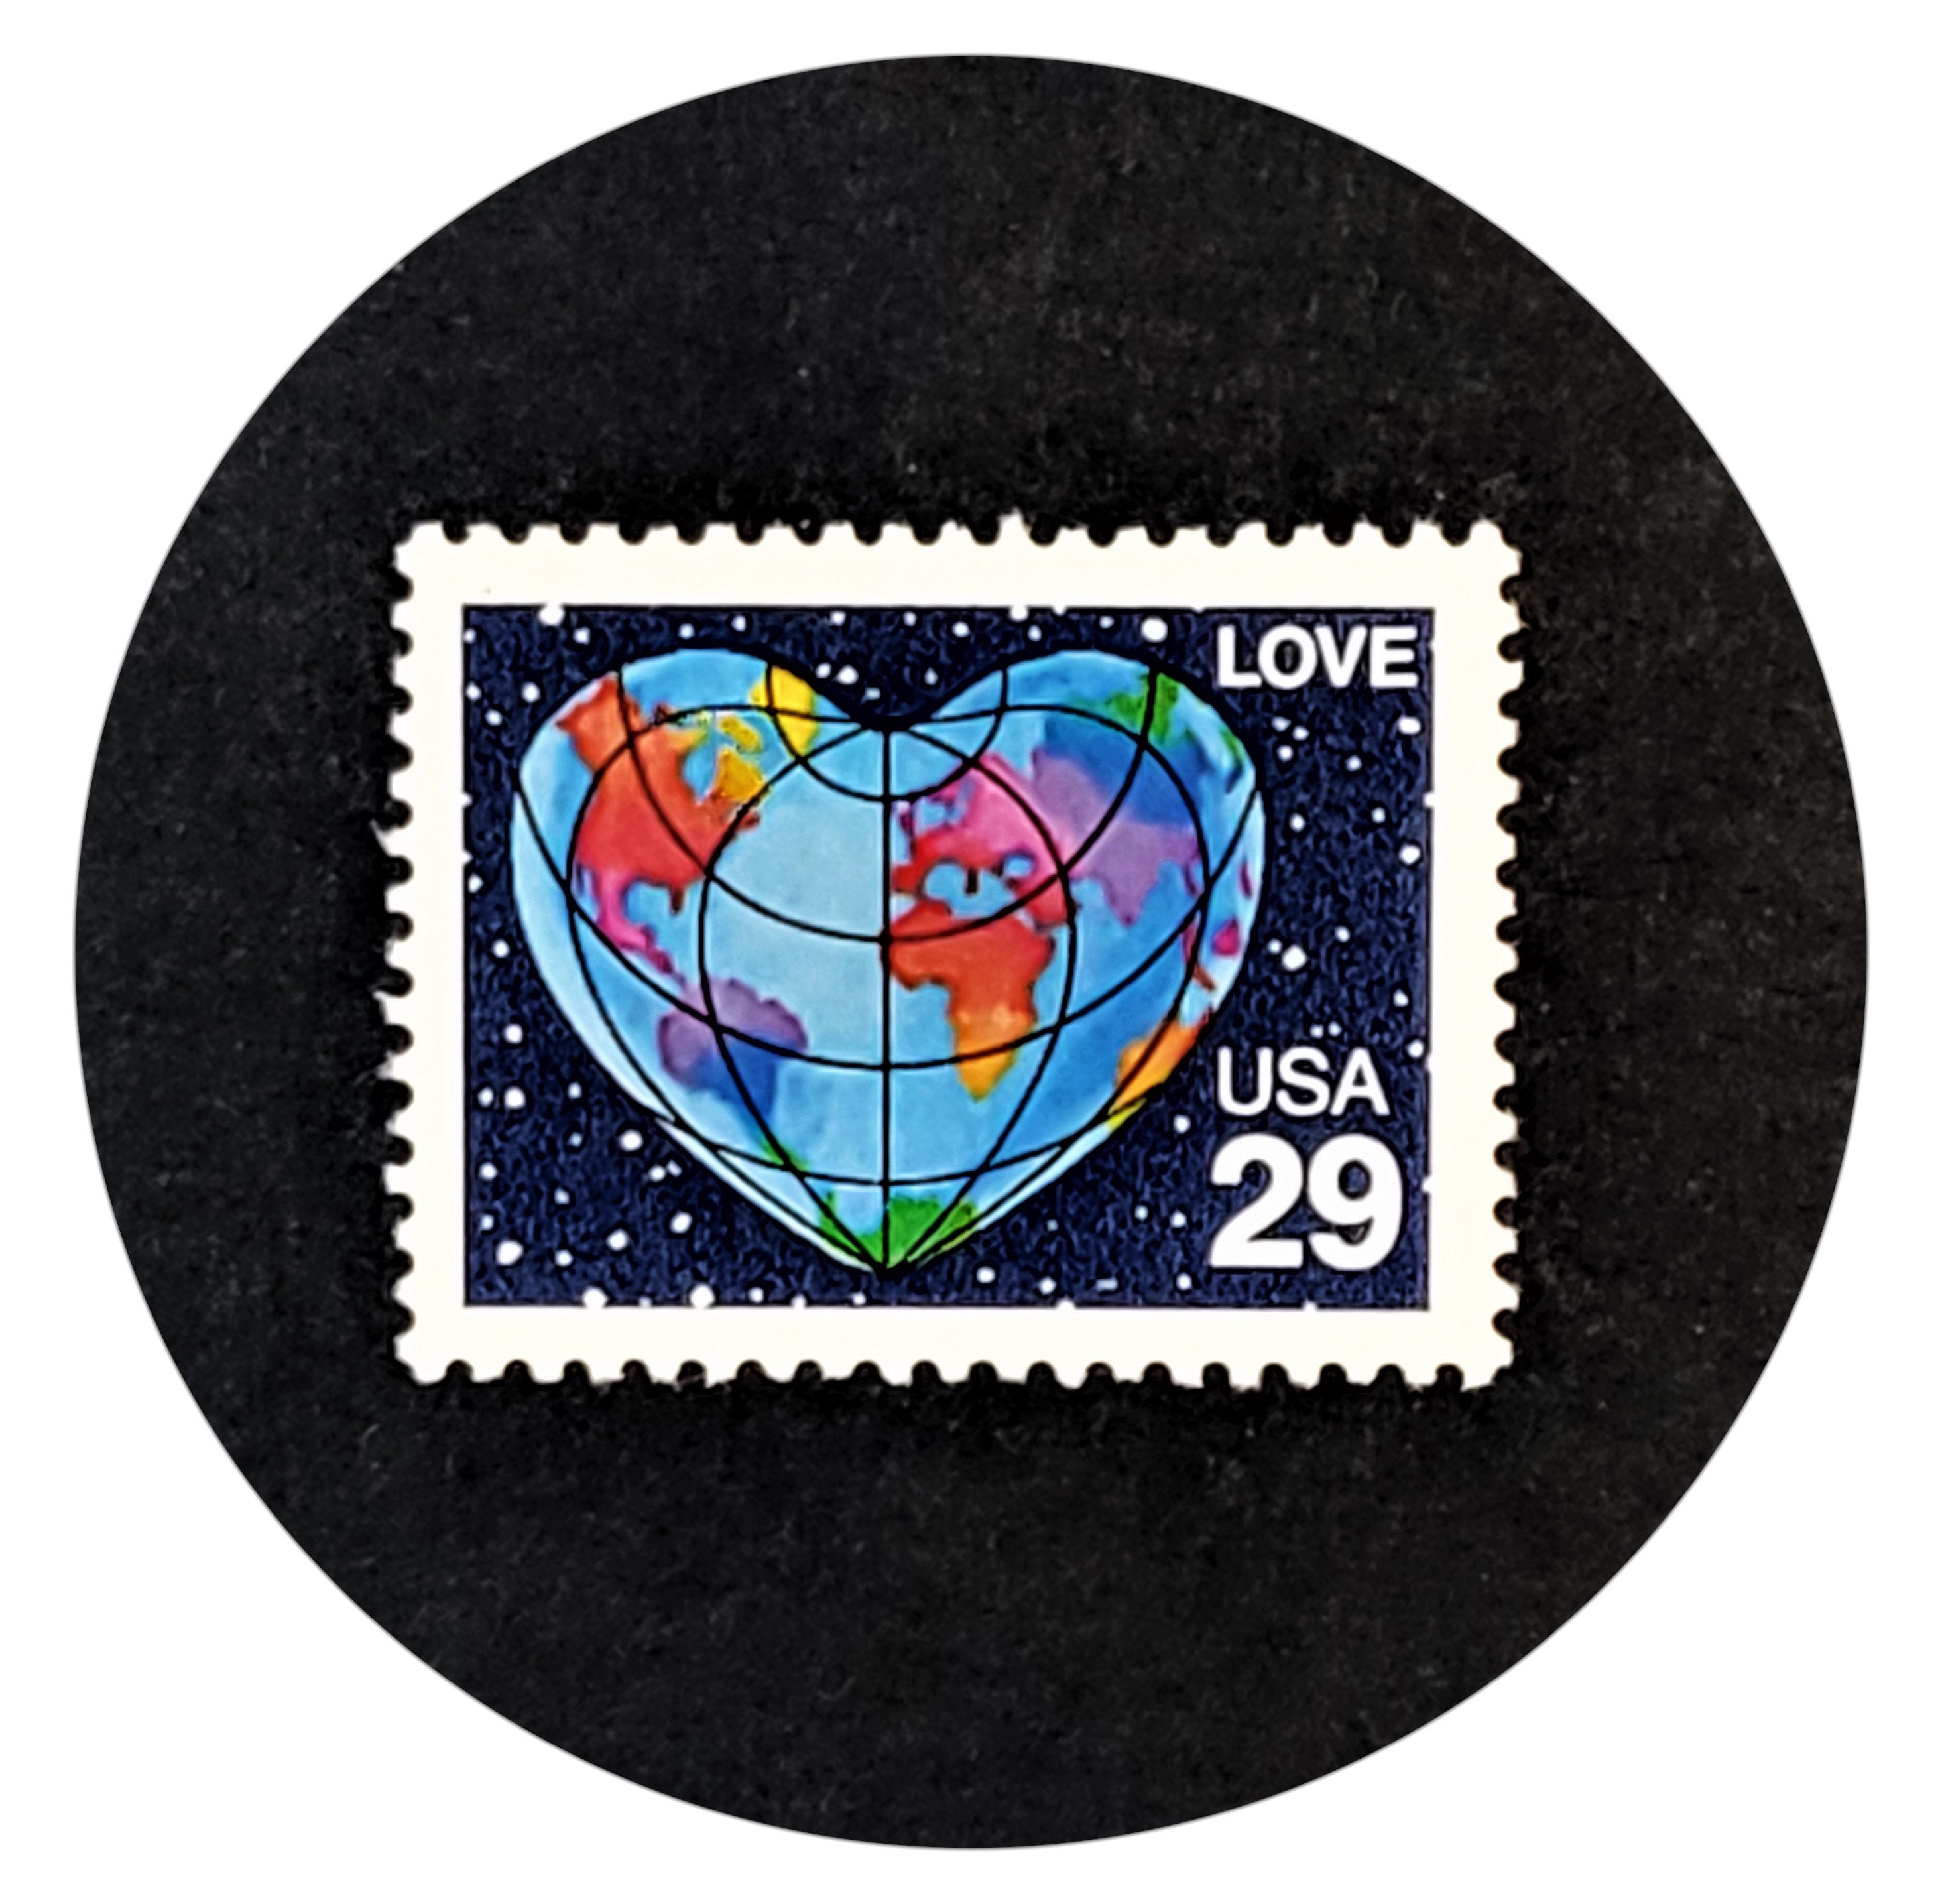 10 Love Rainbow Heart Stamps, 20 Cent 1984 Unused Postage Stamps, Colorful  Hearts 